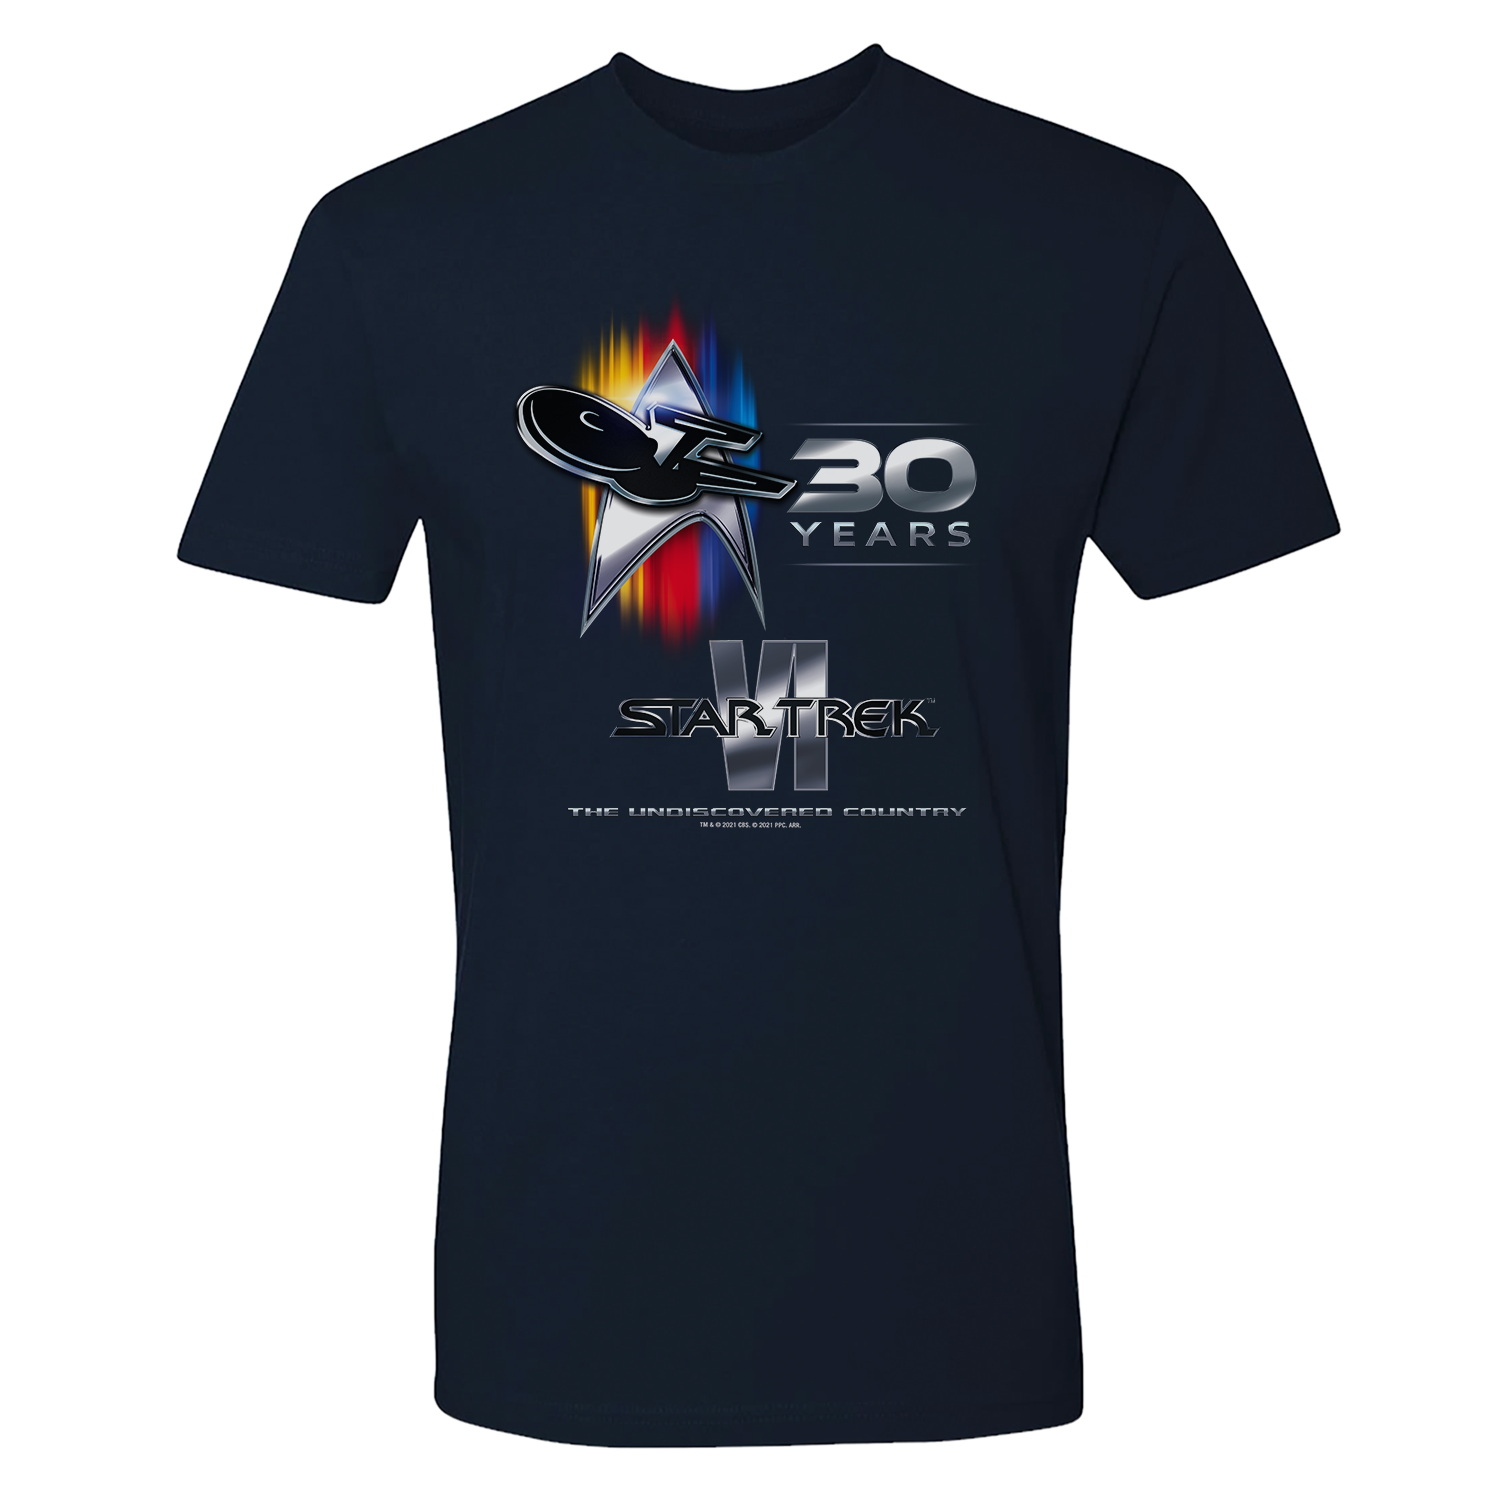 Star Trek VI: The Undiscovered Country 30th Anniversary Adult Short Sleeve T-Shirt